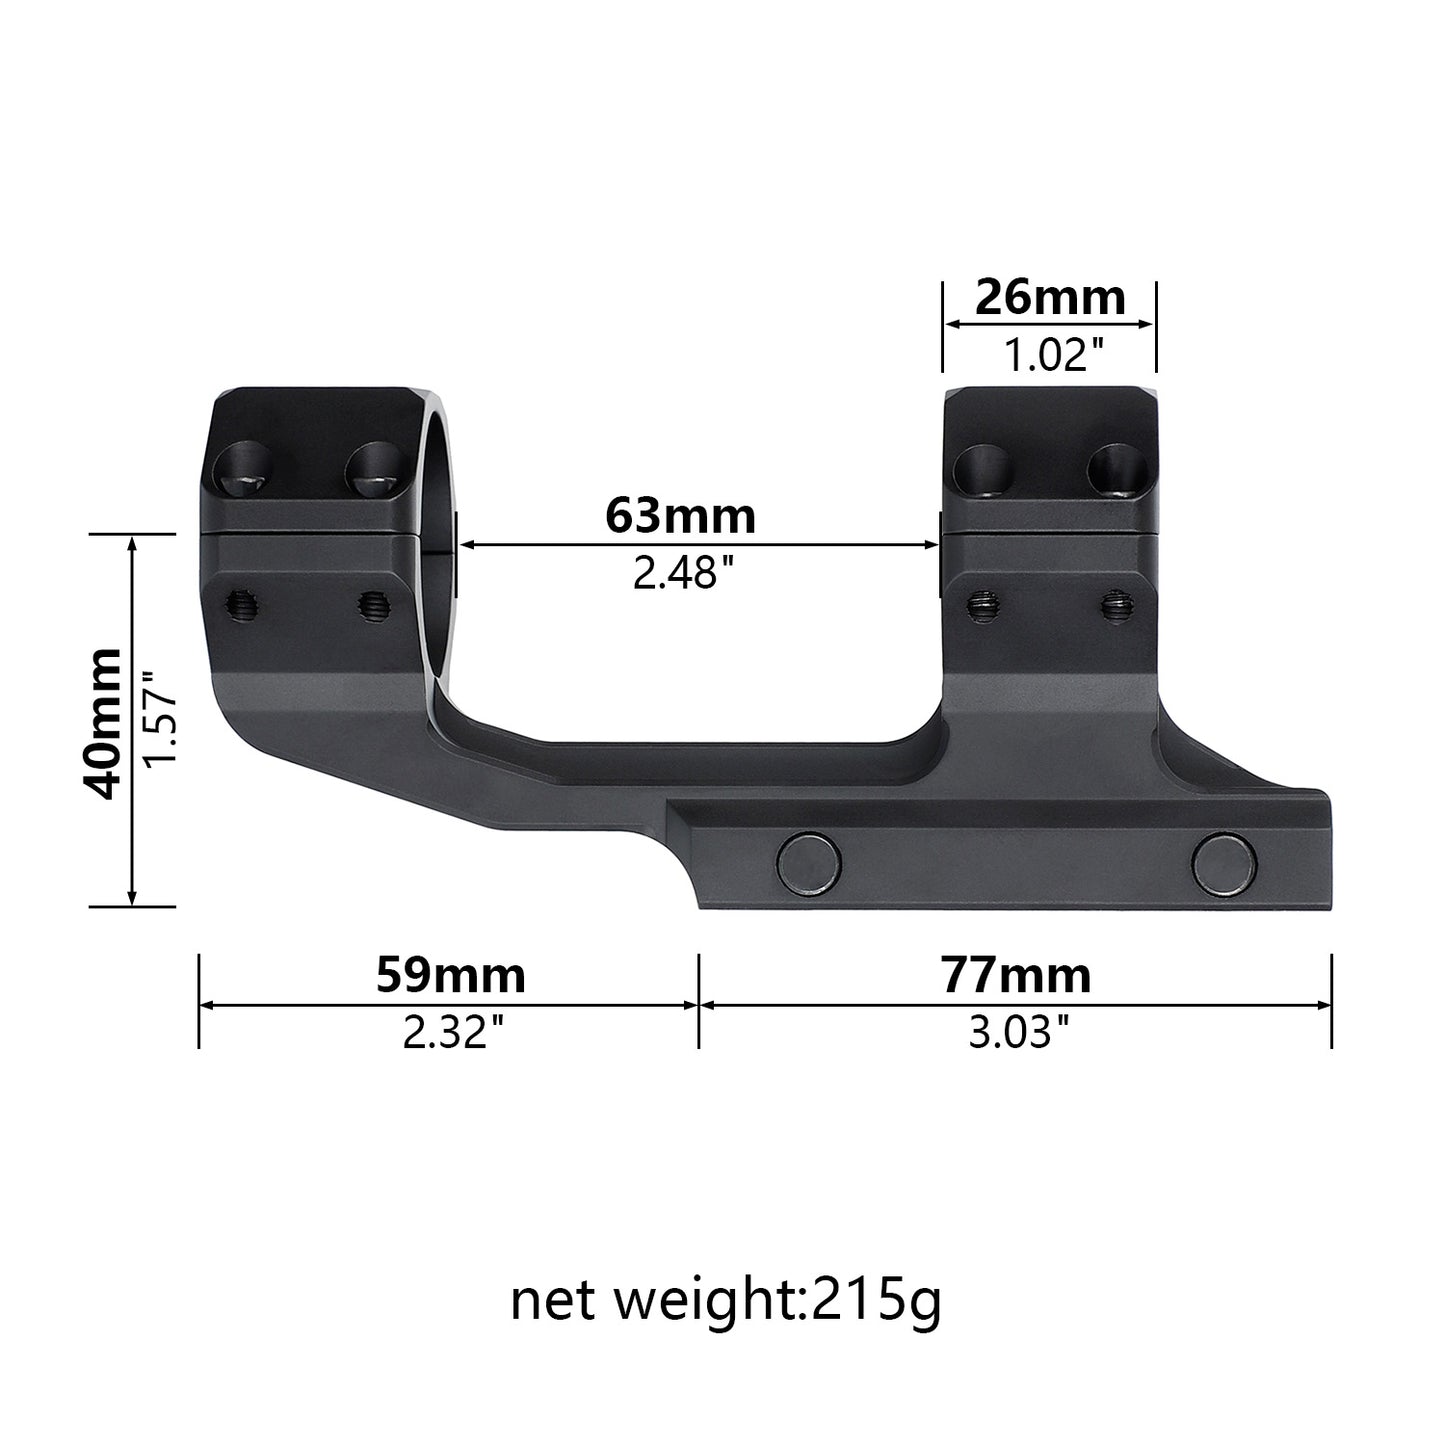 ohhunt® 34mm Cantilever Scope Mount Picatinny Rail